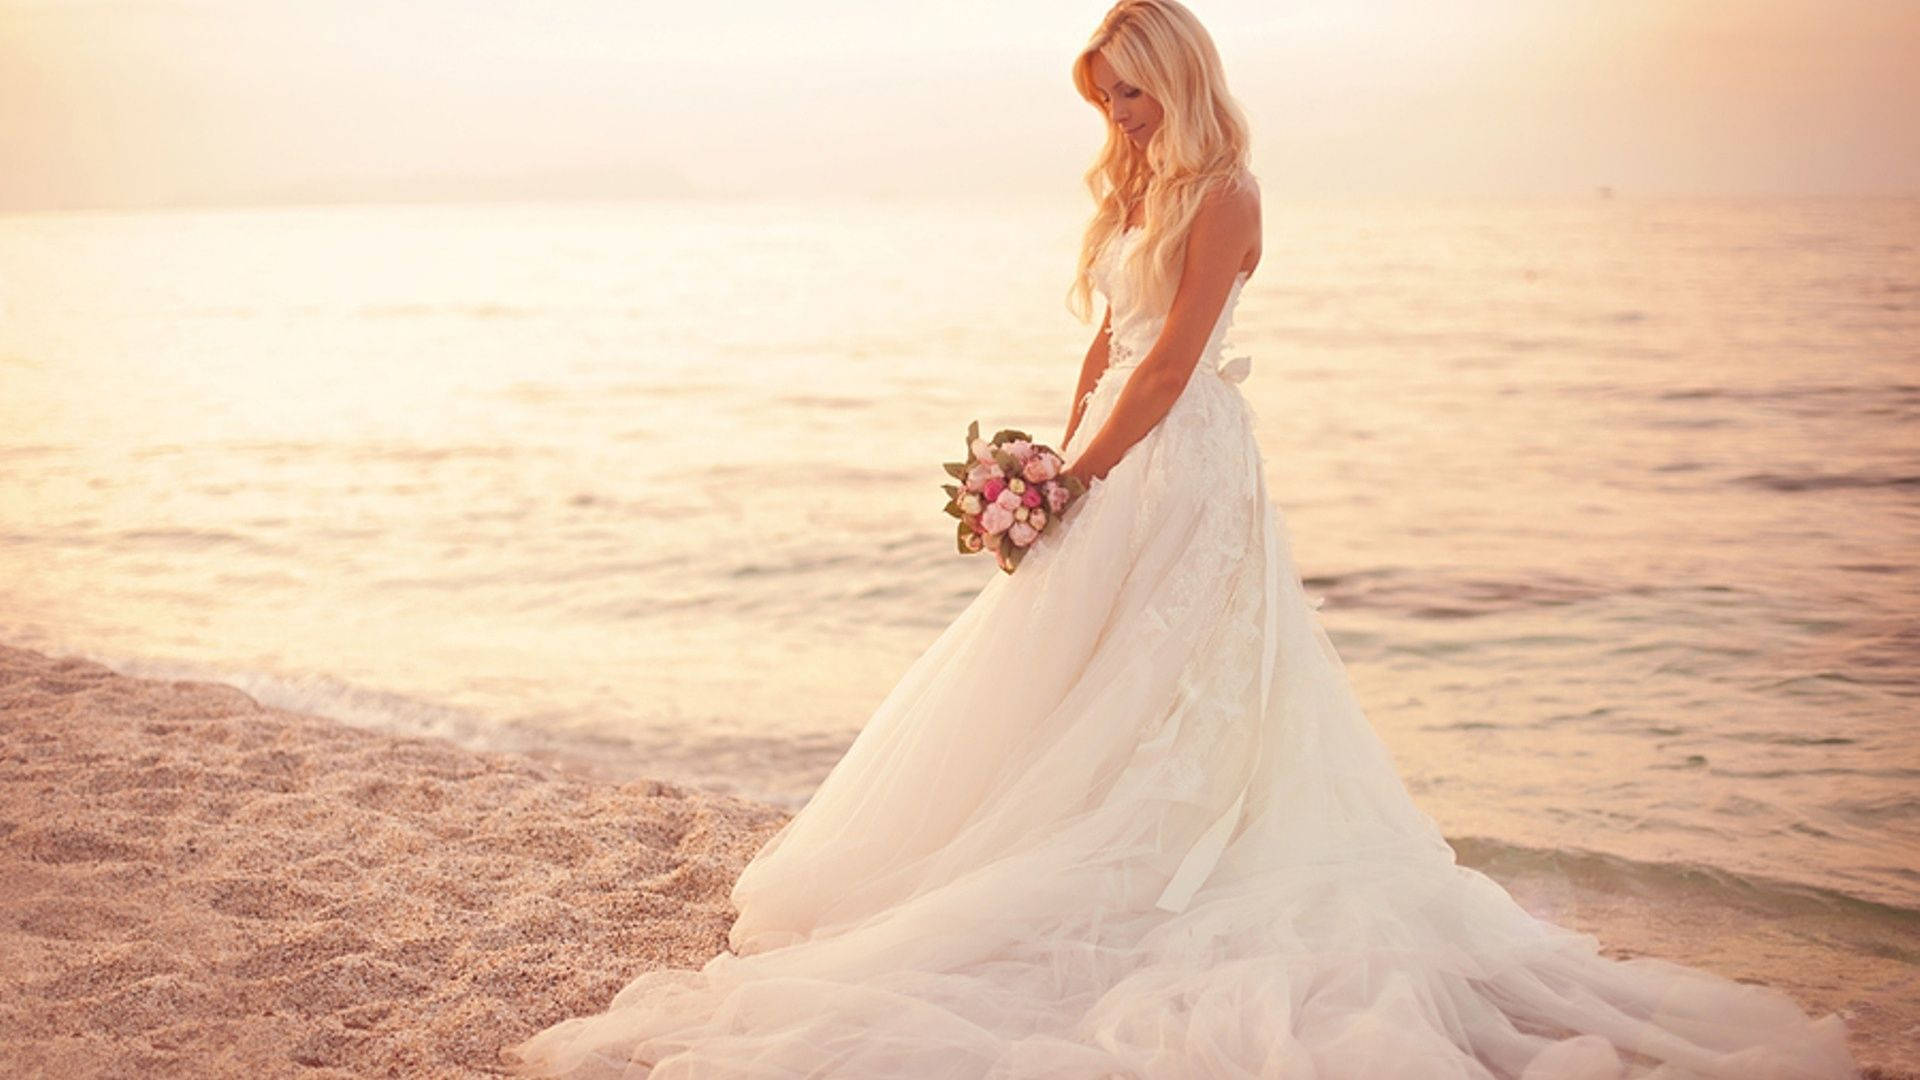 Bride On The Beach Background